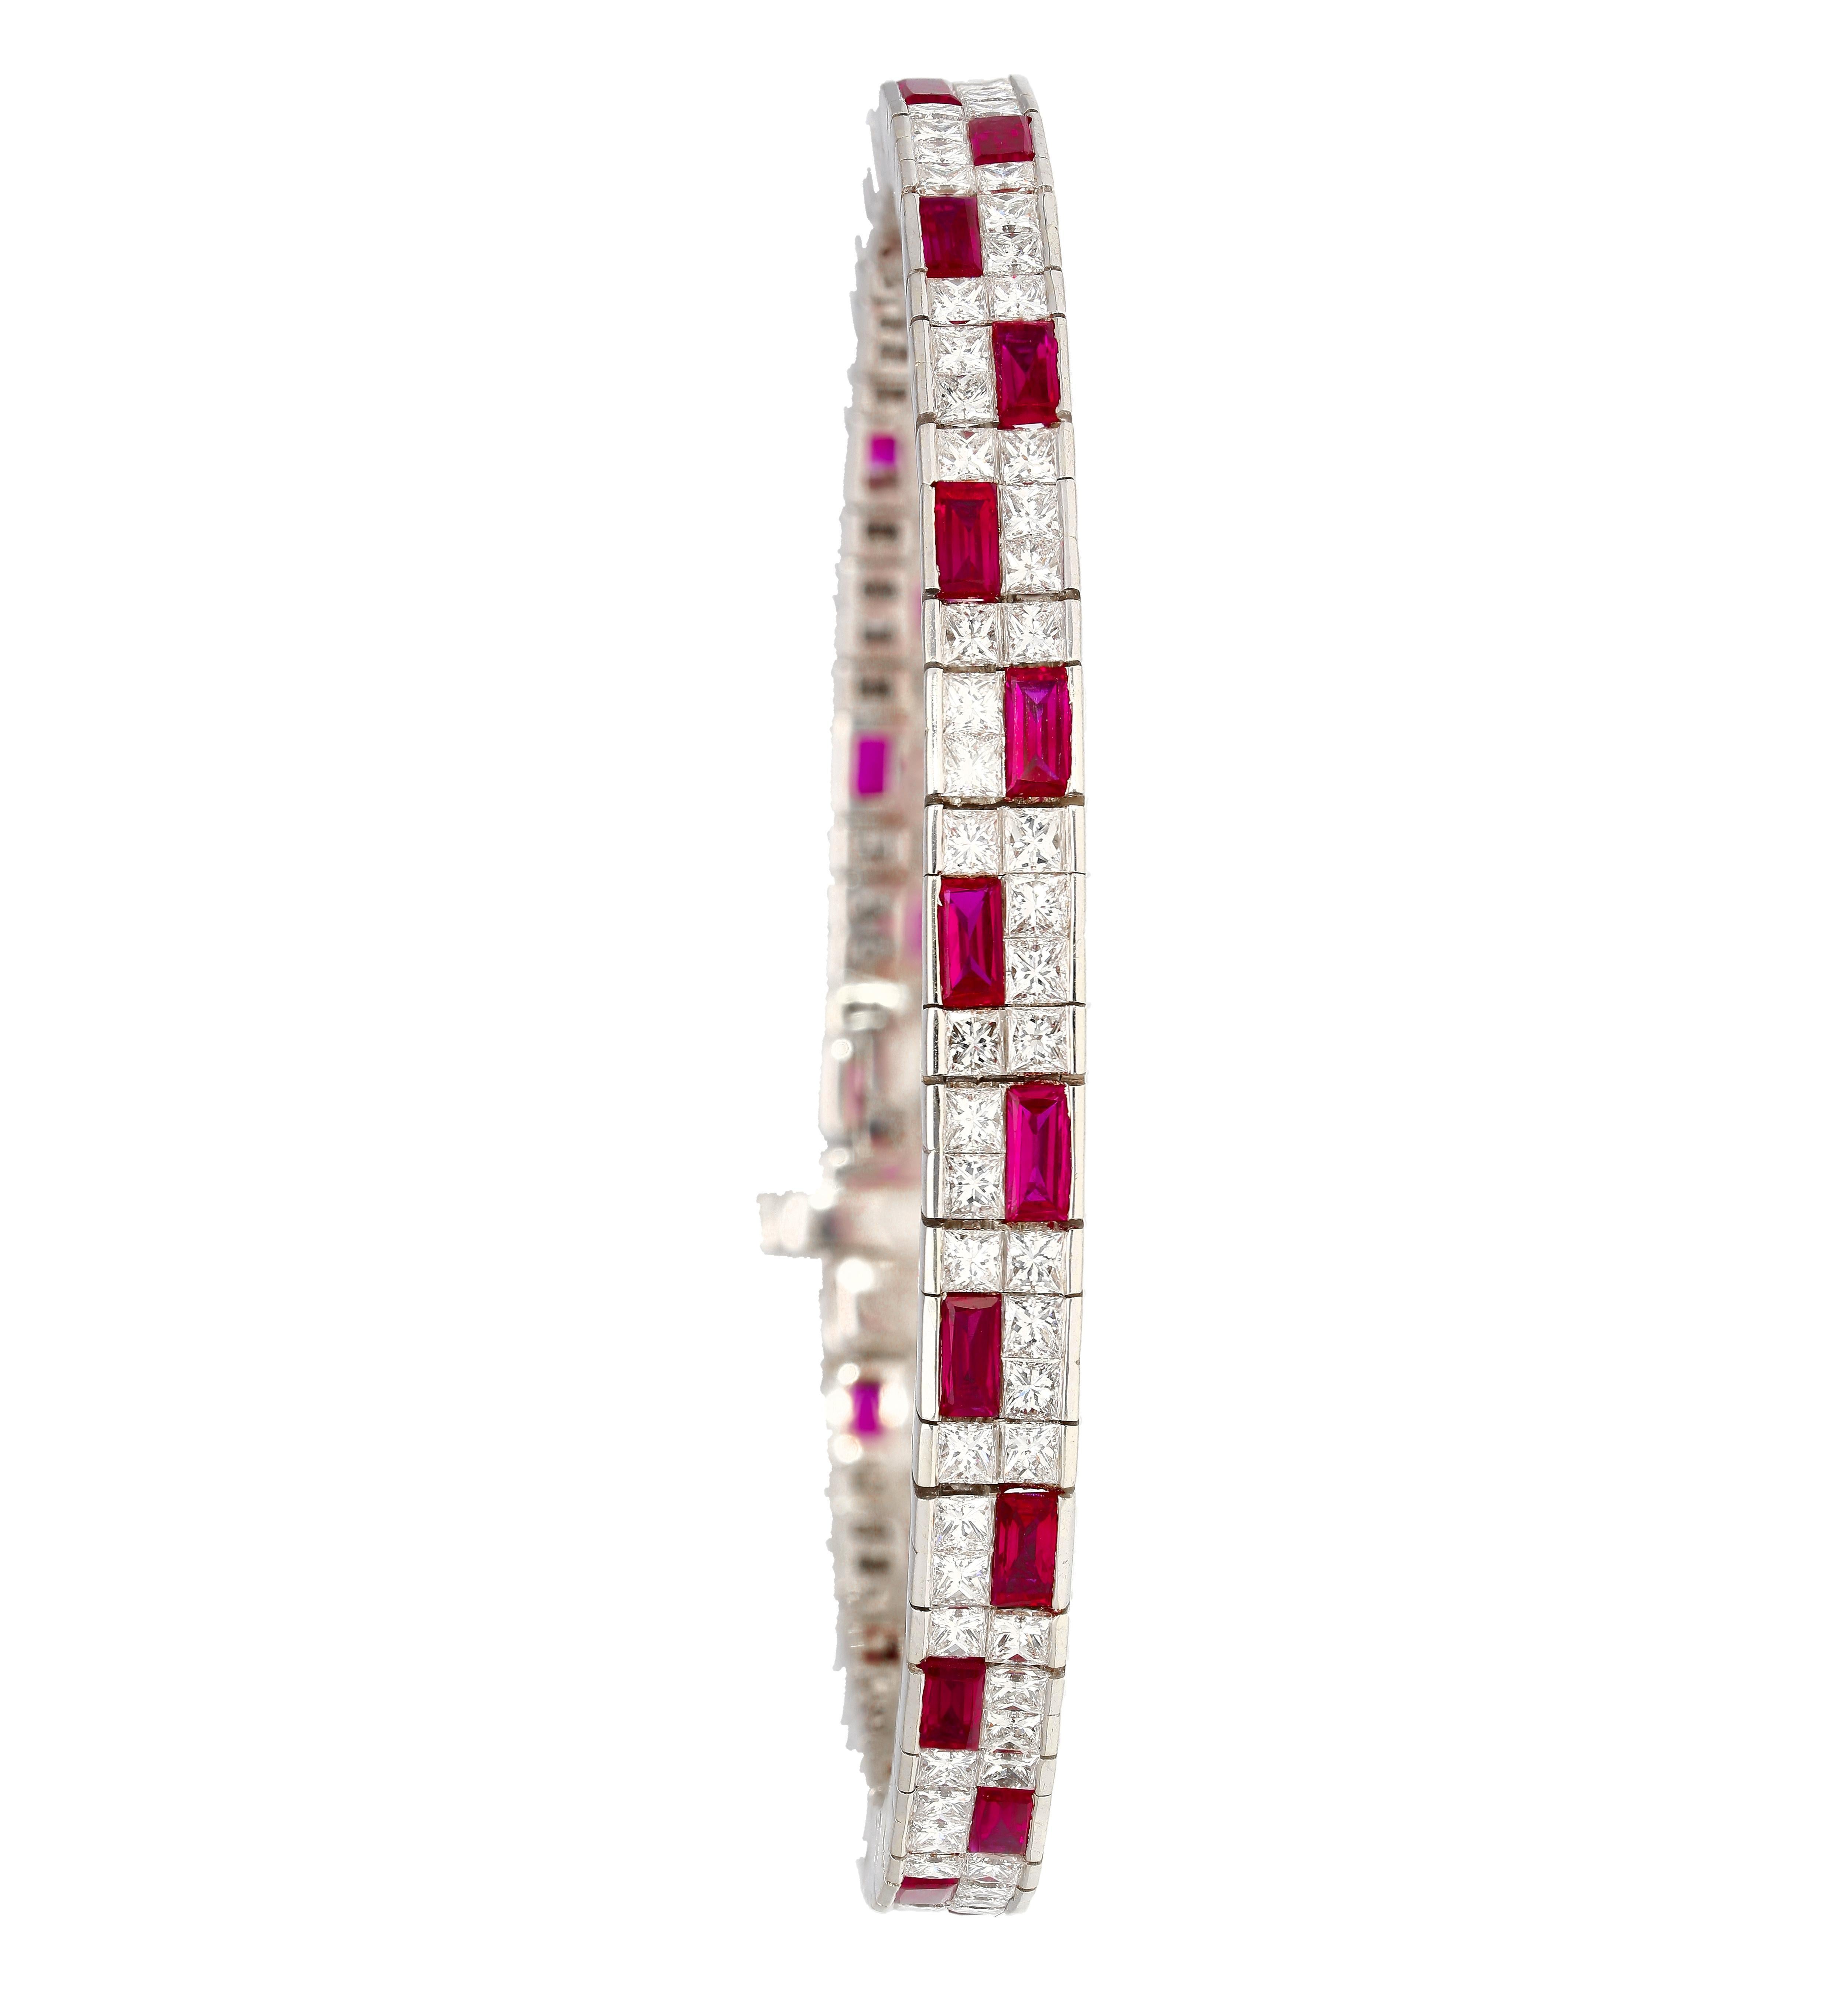 12 Carat Channel Set Art Deco Style Ruby & Diamond Bracelet in 18k White Gold In New Condition For Sale In Miami, FL